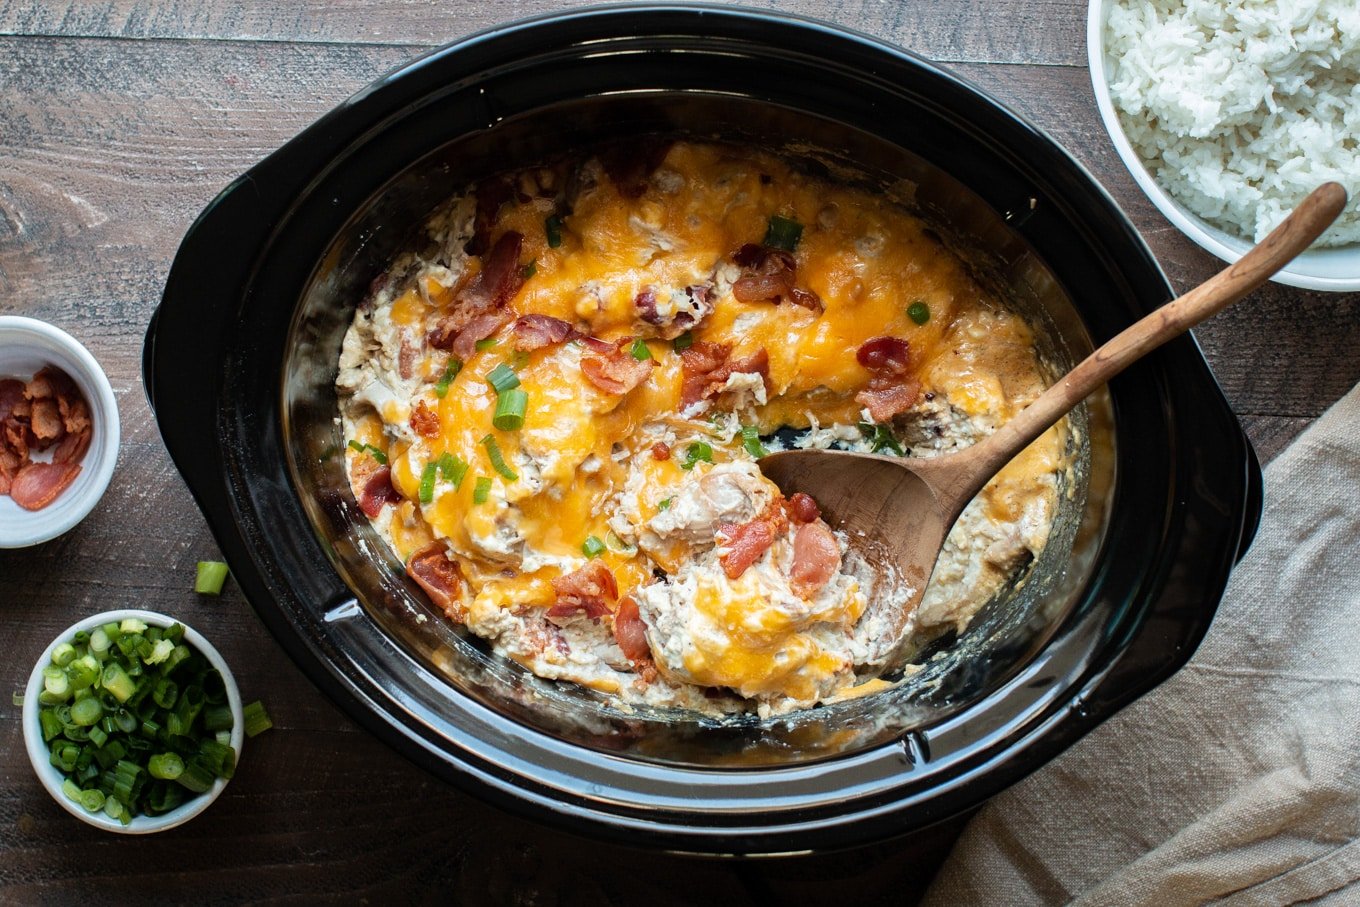 shredded creamy chicken with cheese, bacon and green onion on top, in the slow cooker.